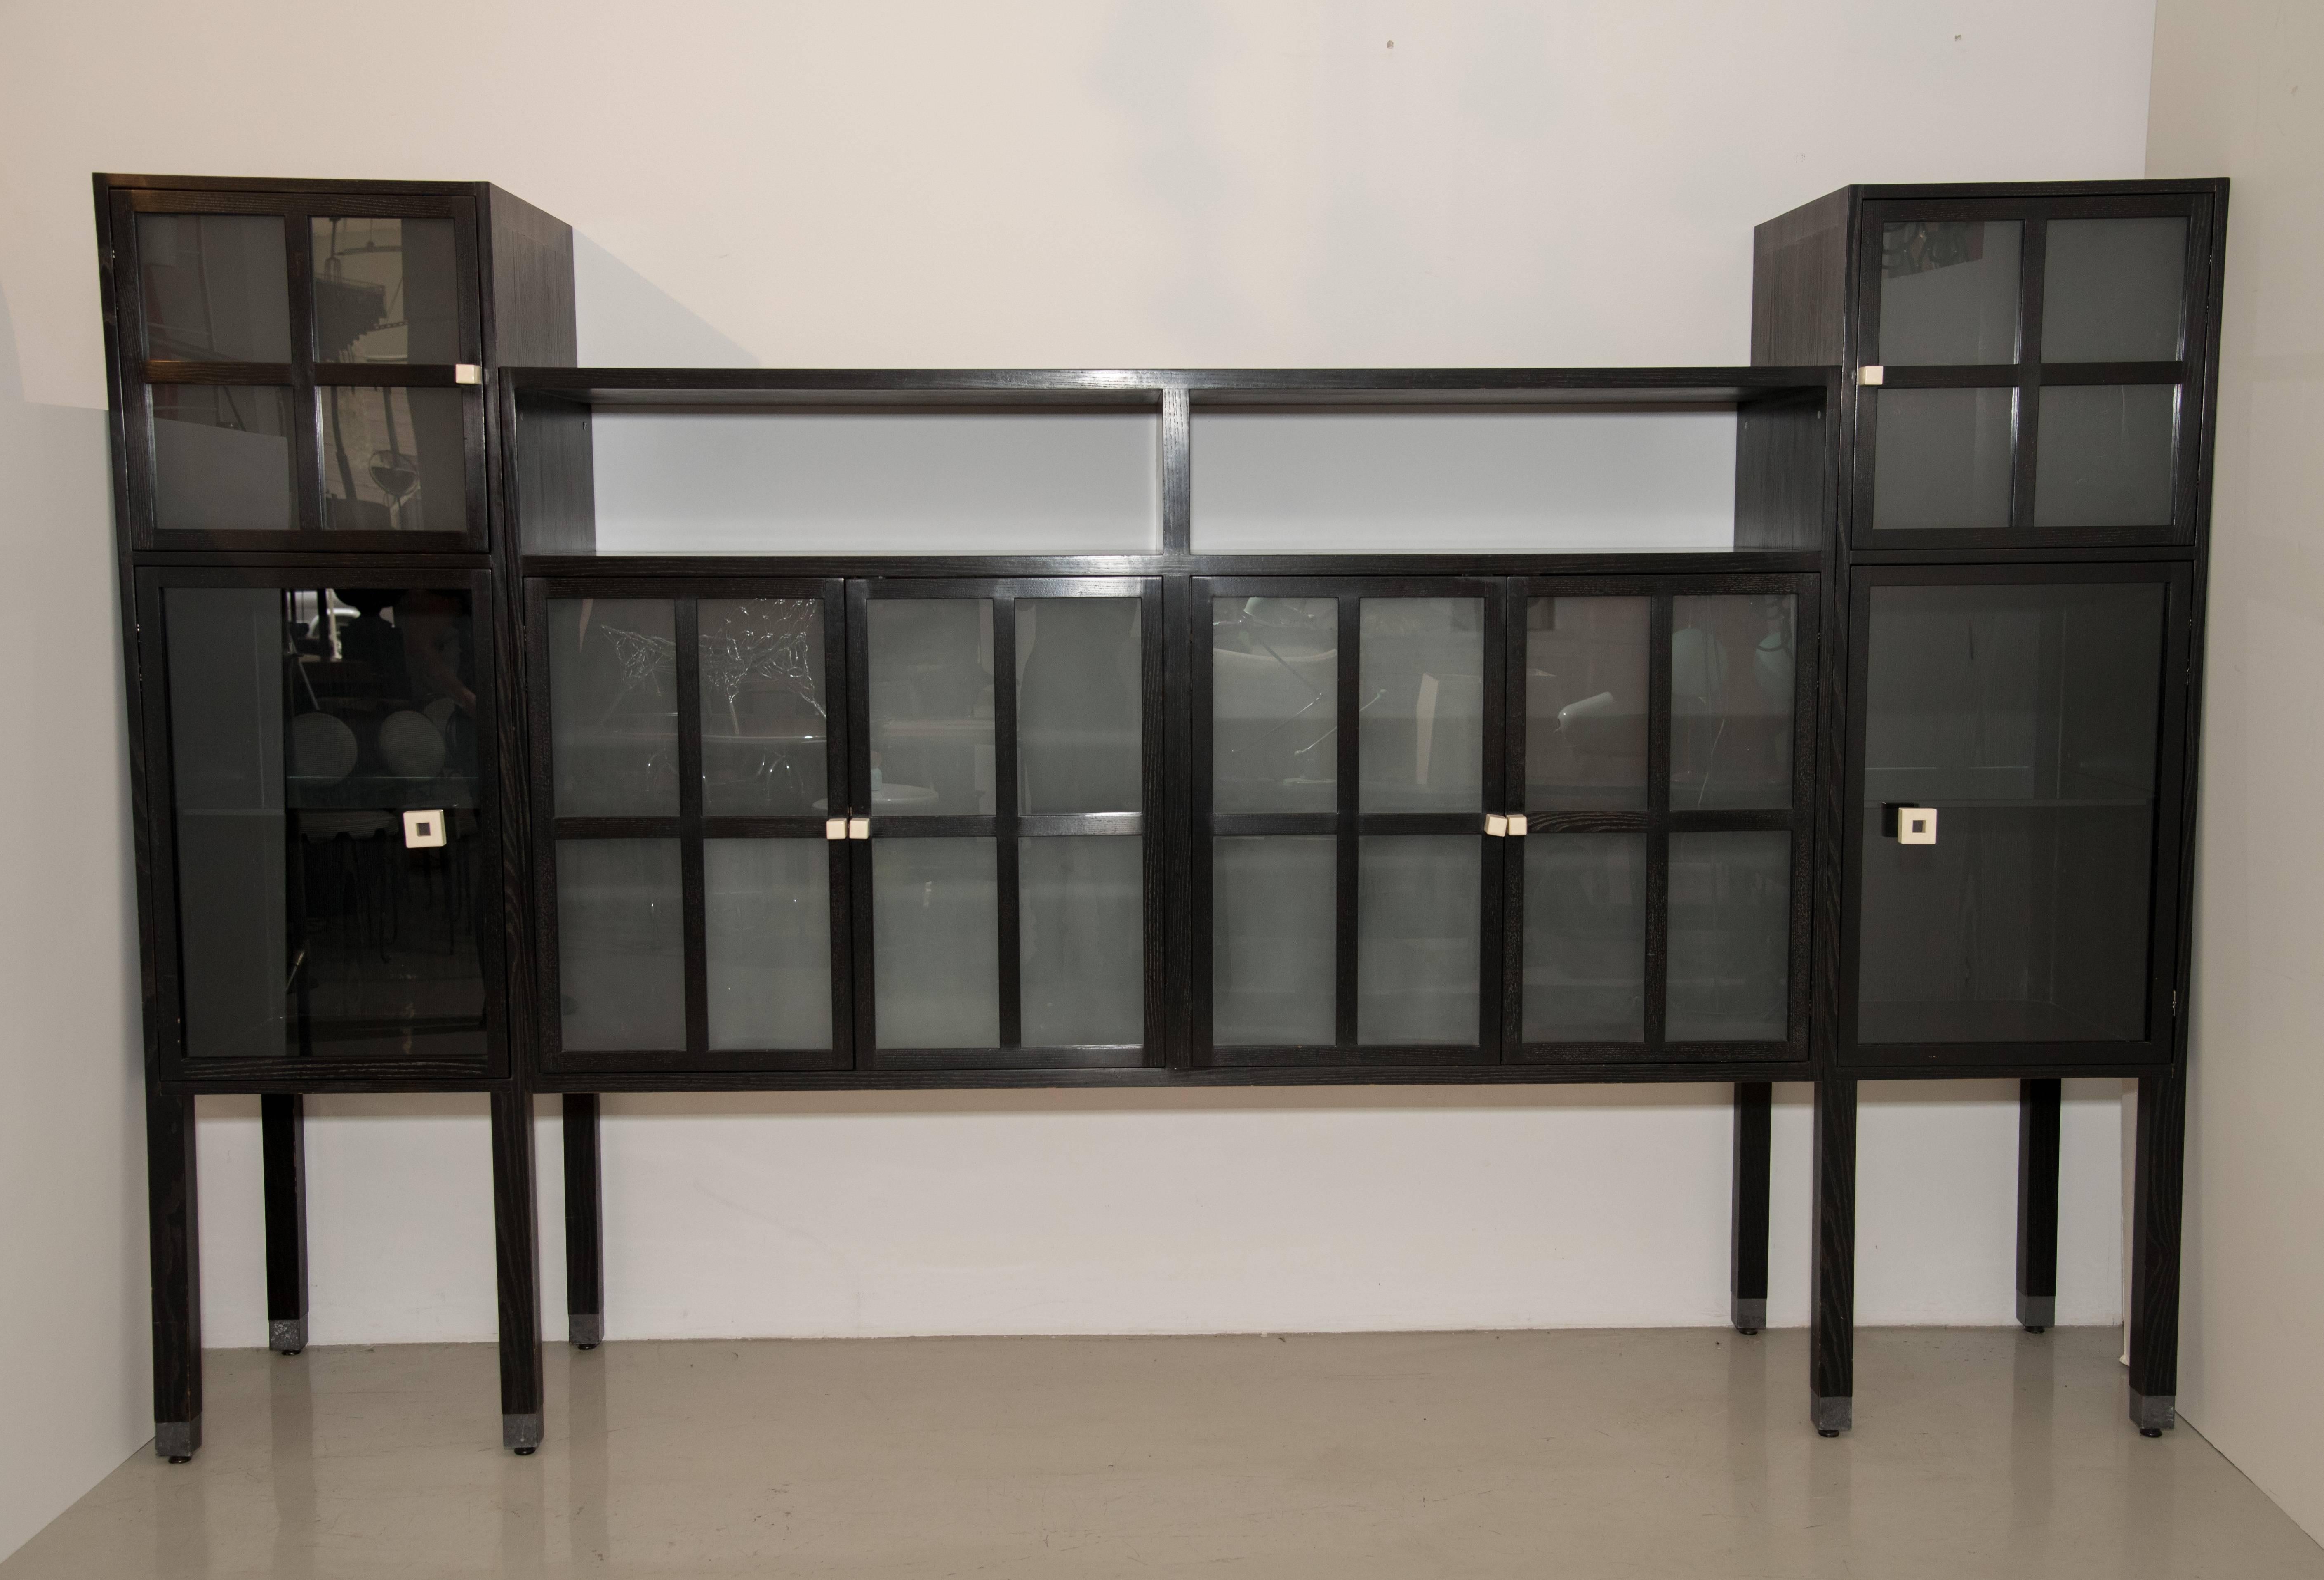 This fabulous cerused ash and sandblasted glass entertainment cabinet, buffet, bar, or even bookcase cabinet has wonderful storage and a very modern look. It is called the Piombo cabinet. This is Leon Rosen for Pace. It has glass and wood shelves.